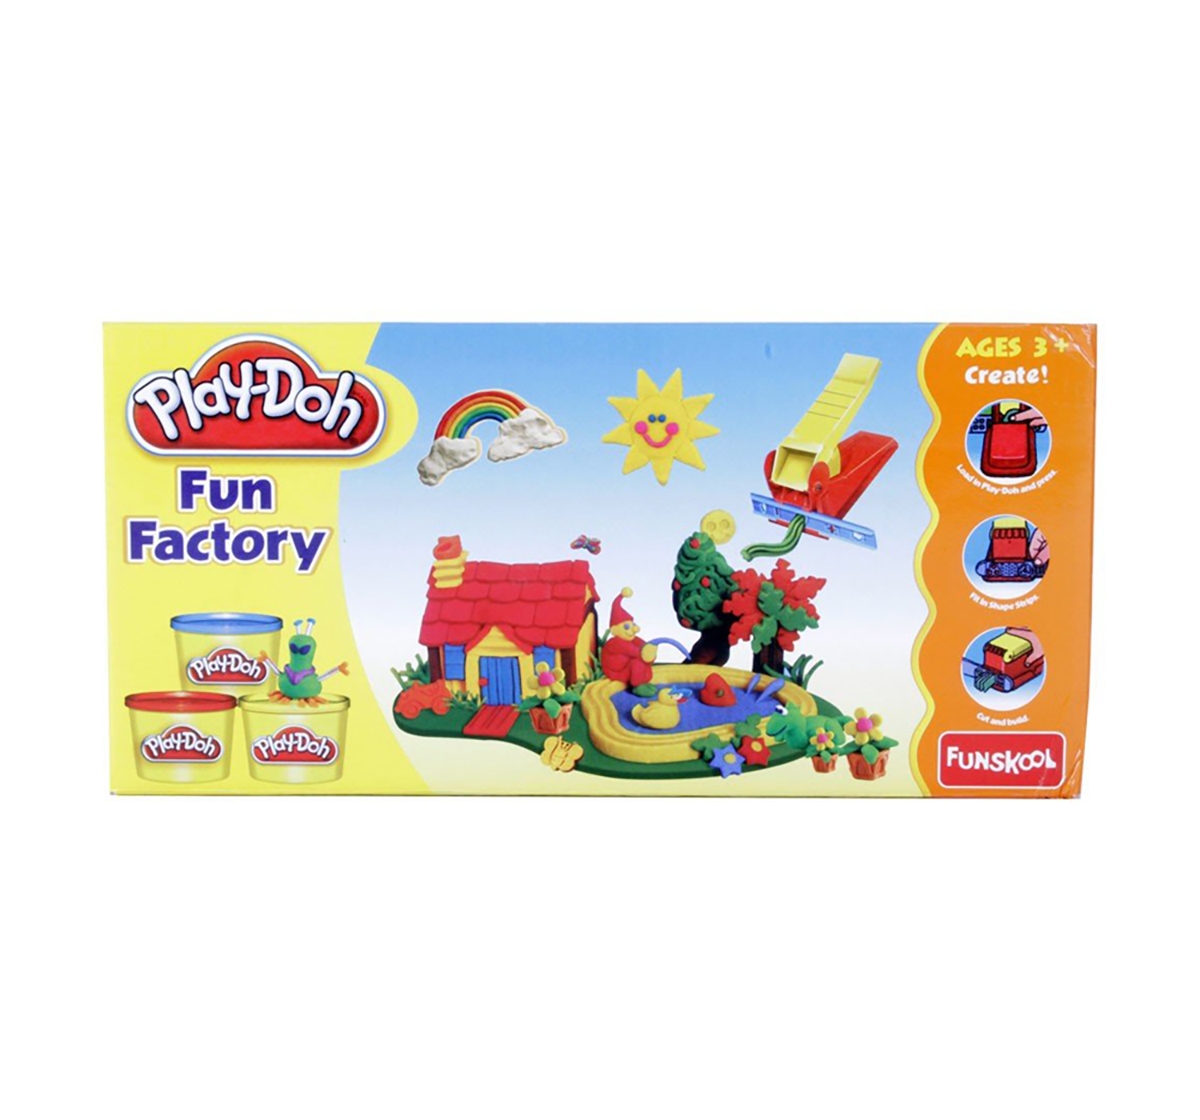 Funskool Fun Dough Molly Dolly for Shaping and Sculpting (for kids aged 3  years and above)